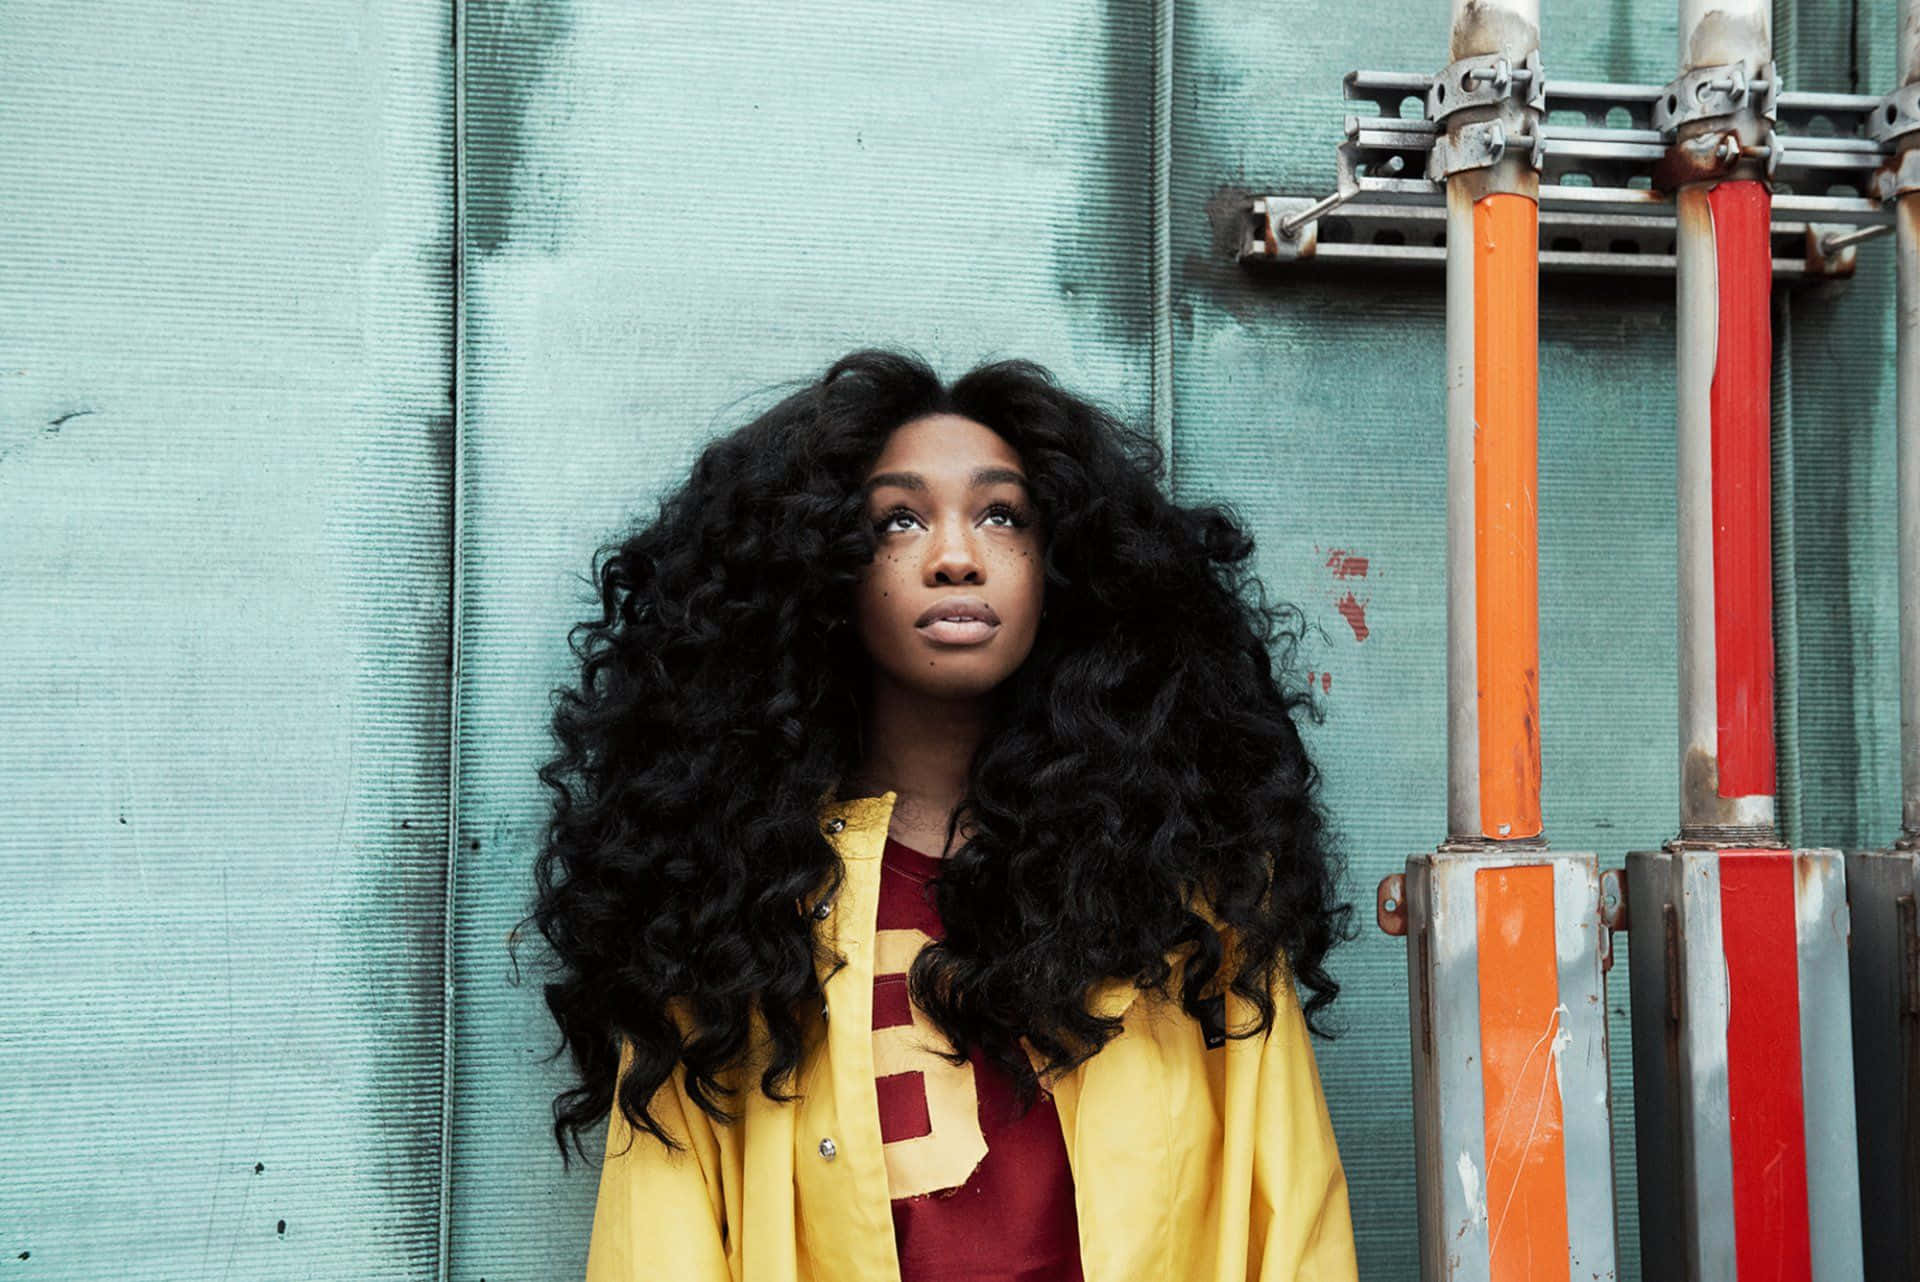 Hear Sza's newest hits and get a glimpse of her exquisite style. Wallpaper